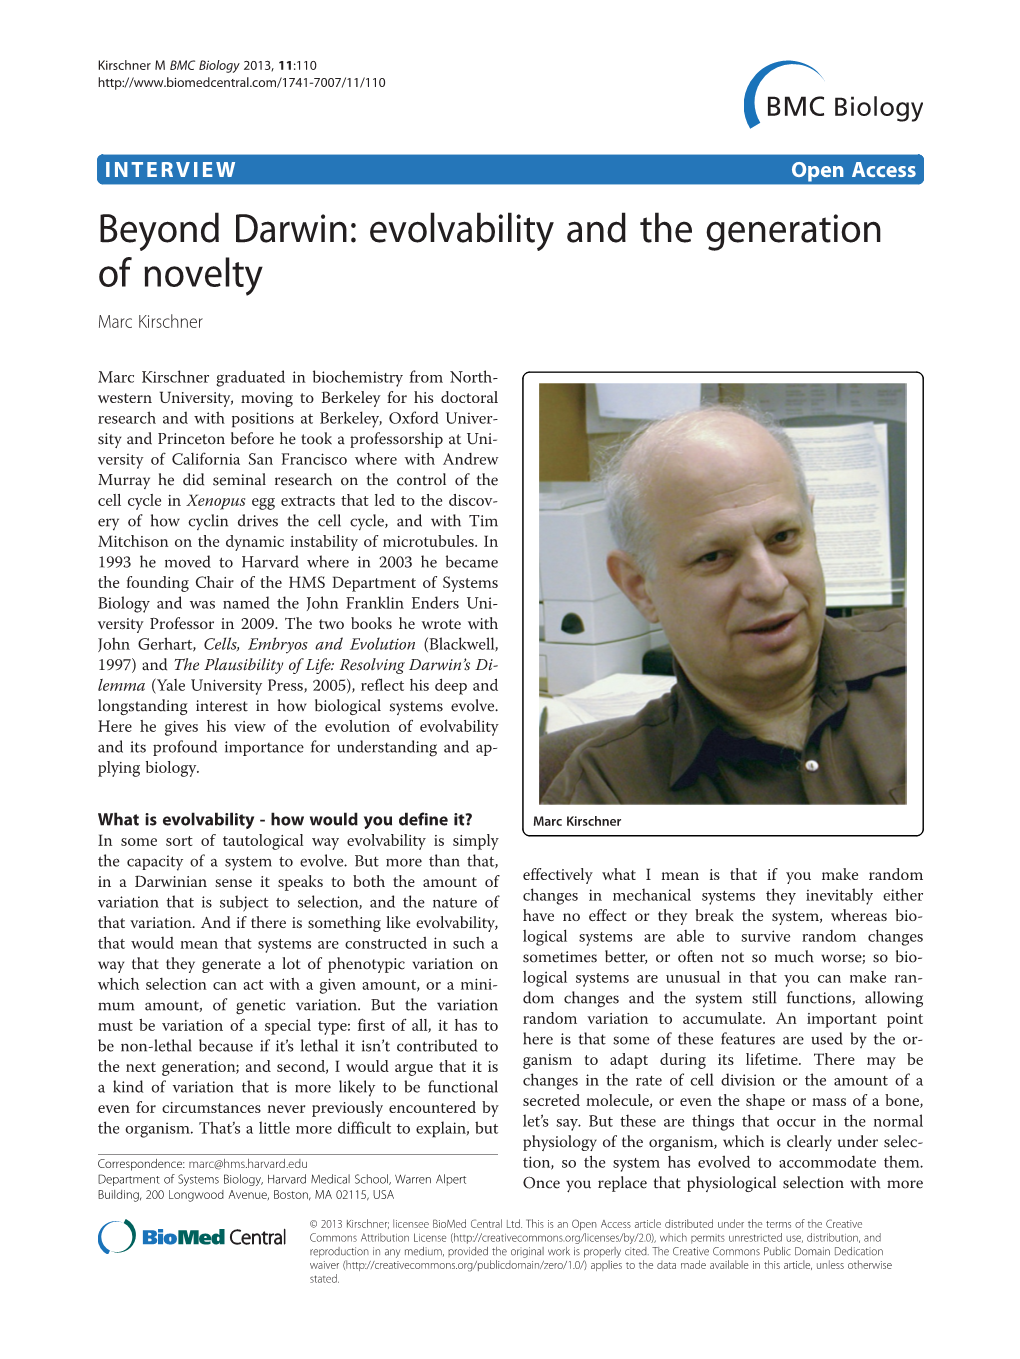 Beyond Darwin: Evolvability and the Generation of Novelty Marc Kirschner